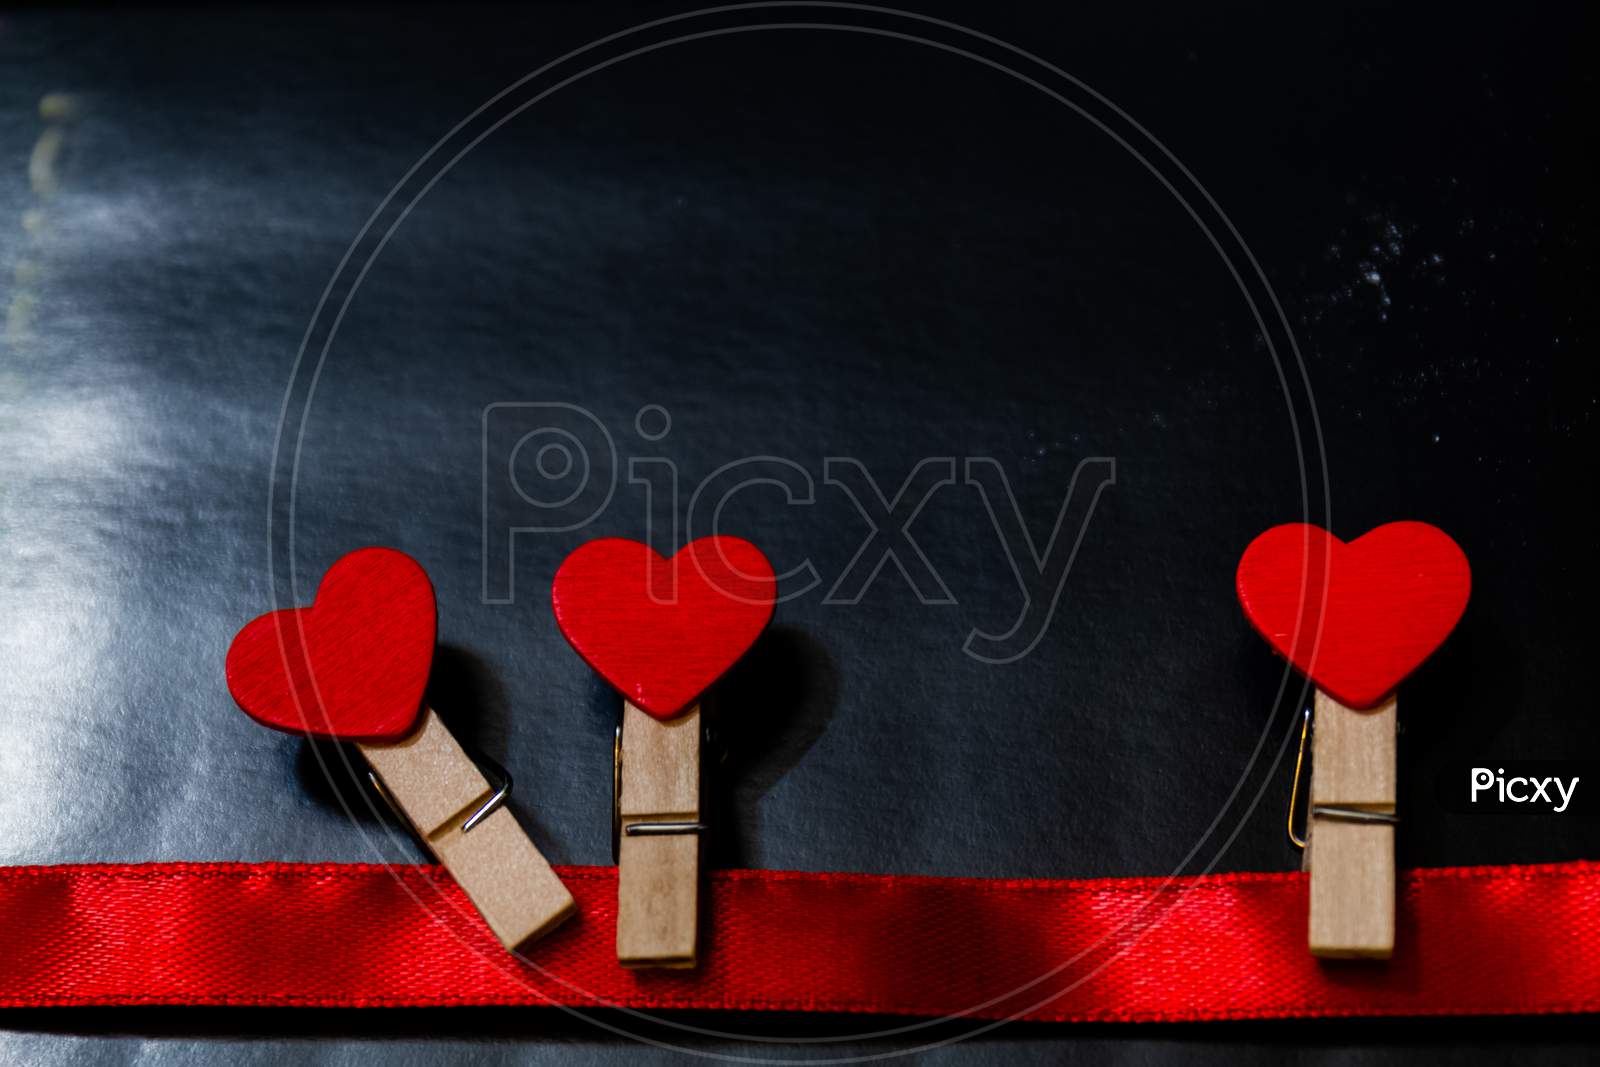 Red hearts Love And valentines Day Concept on an isolated colorful Background